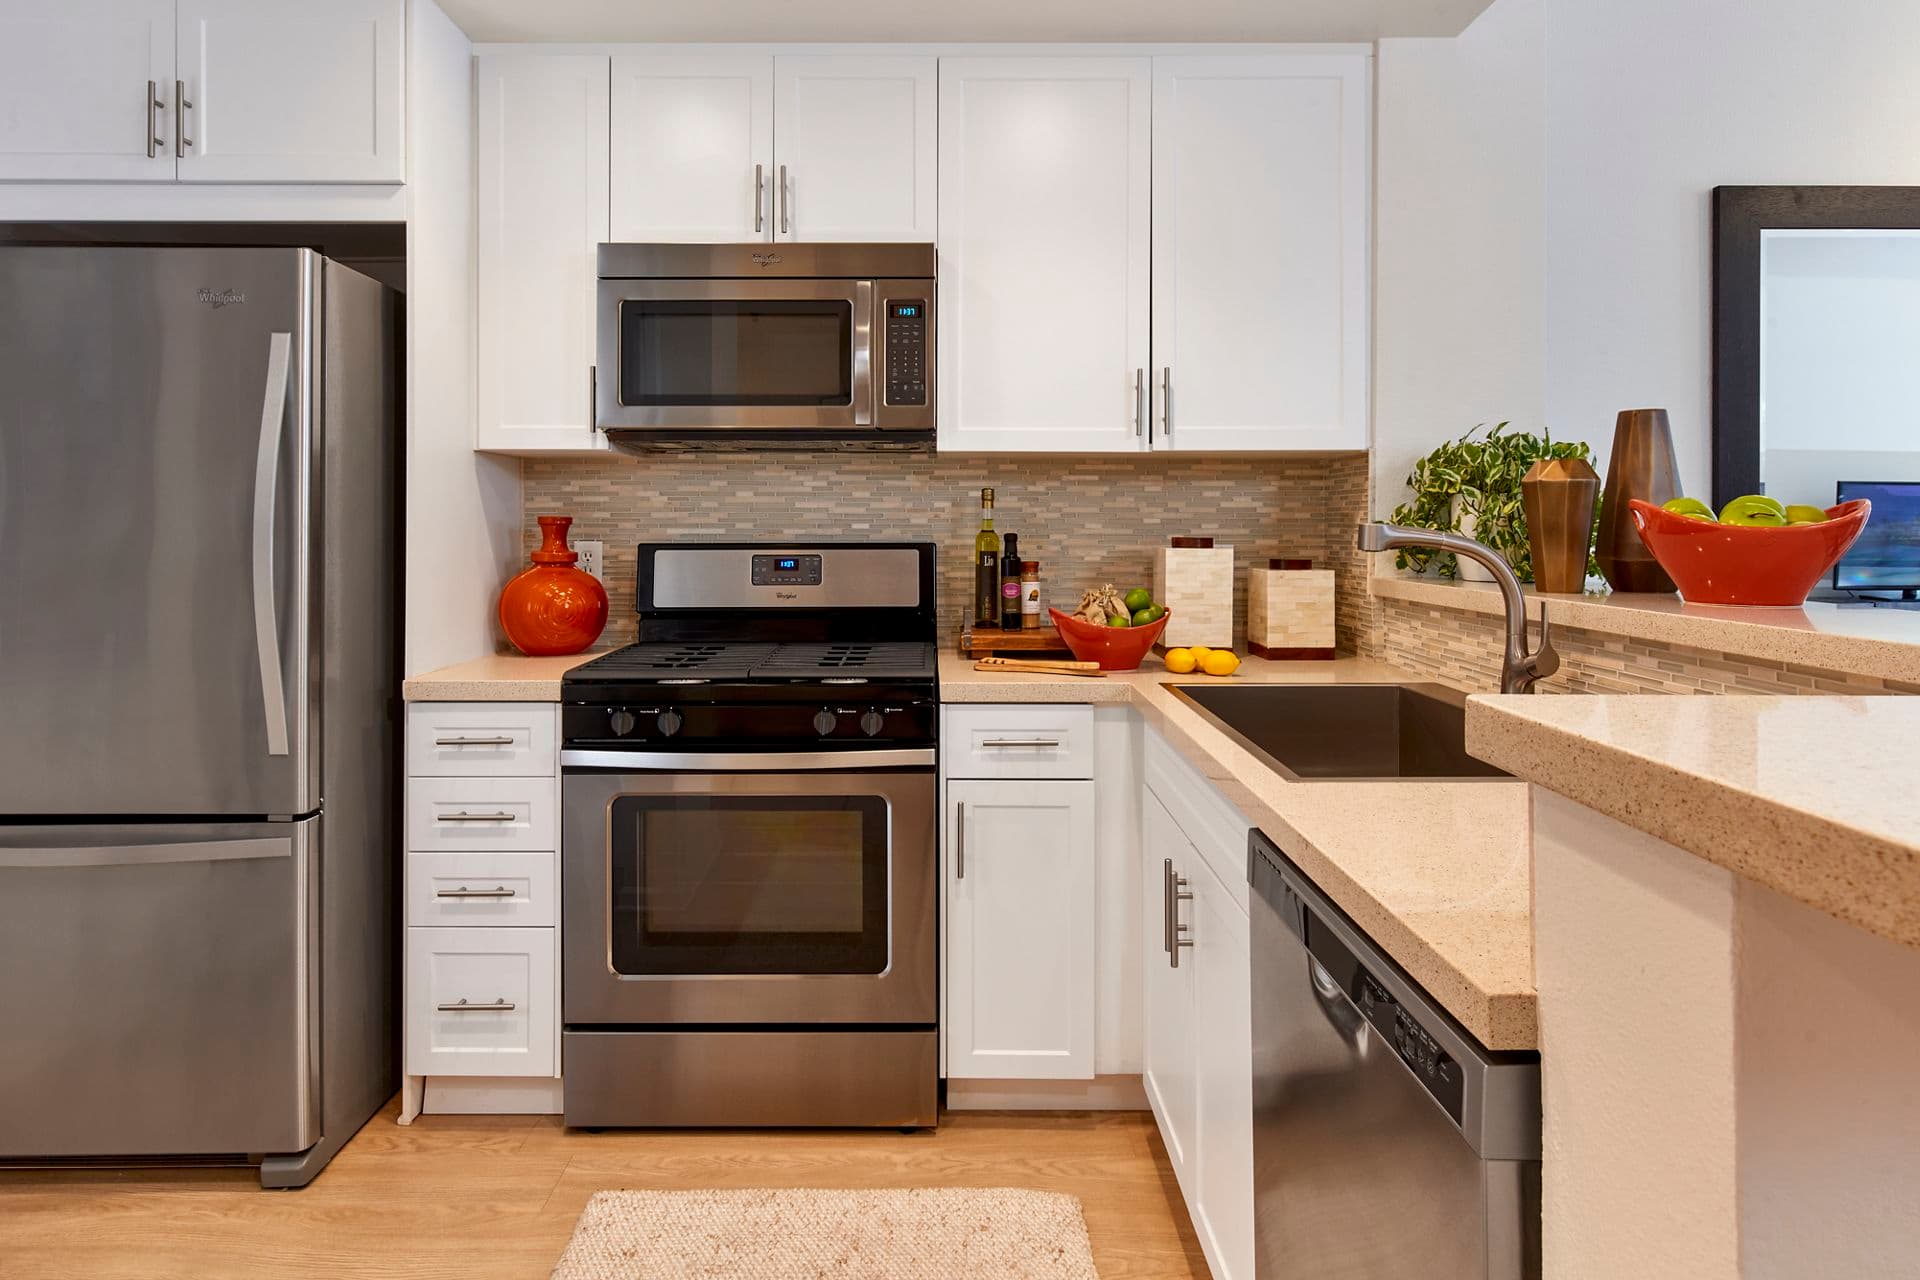 Interior view of kitchen at Franklin Street Apartment Homes in Redwood City, CA.